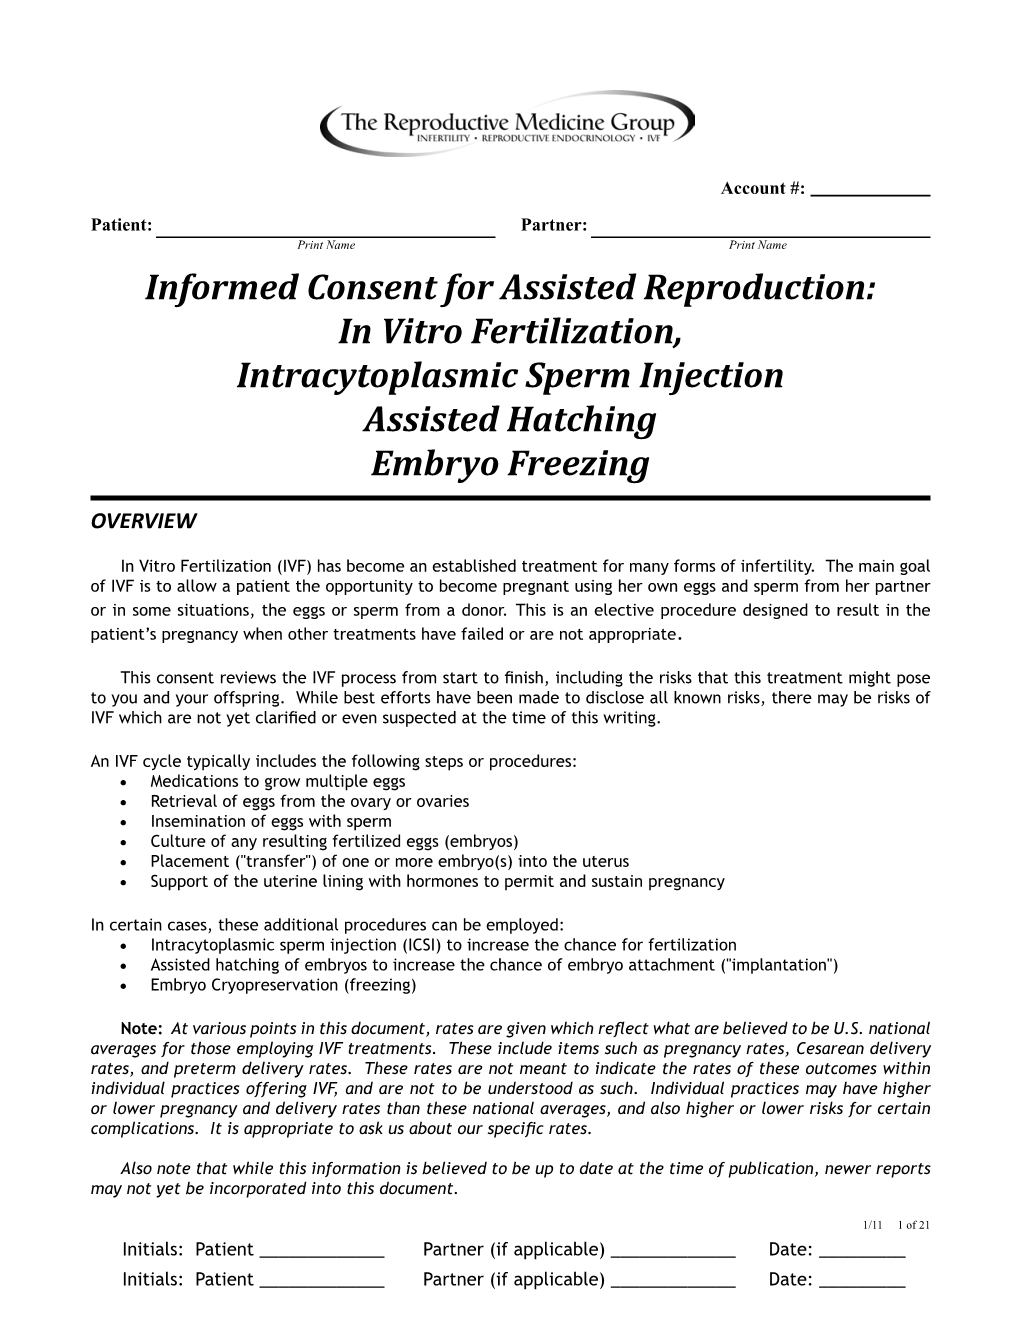 Informed Consent For Assisted Reproduction In Vitro Fertilization Intracytoplasmic Sperm 9460